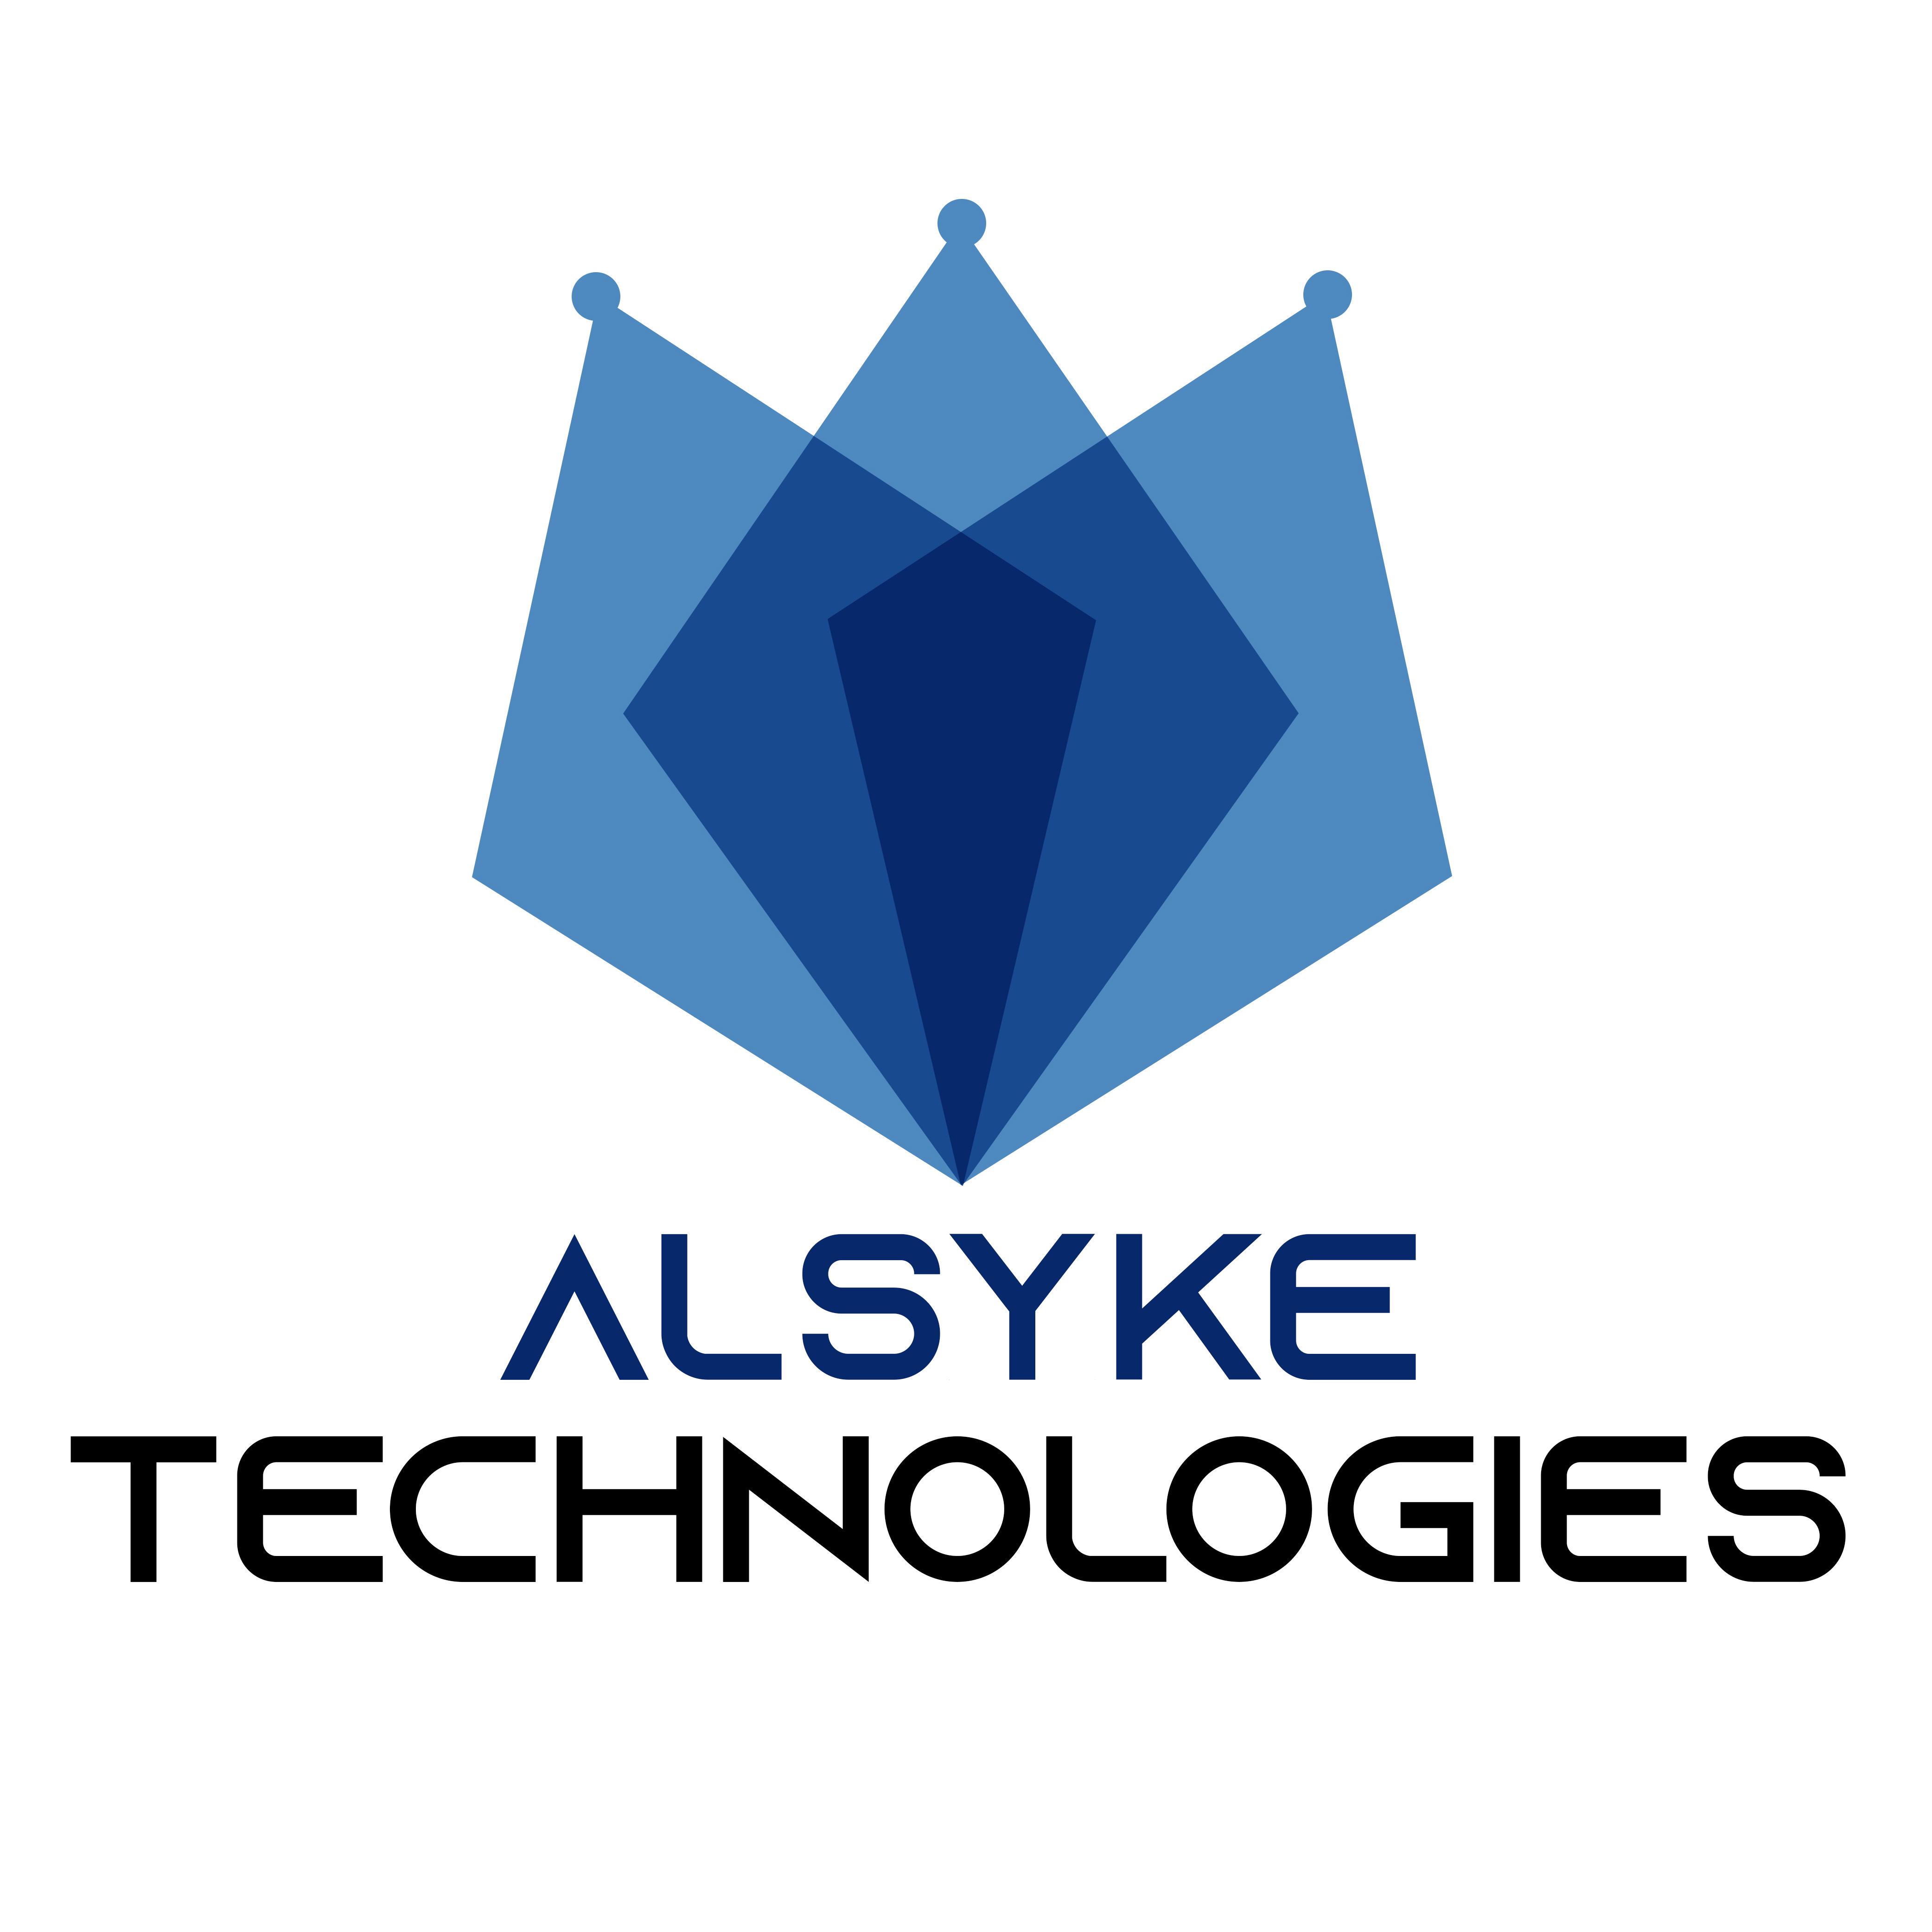 Alsyke Technologies profile on Qualified.One